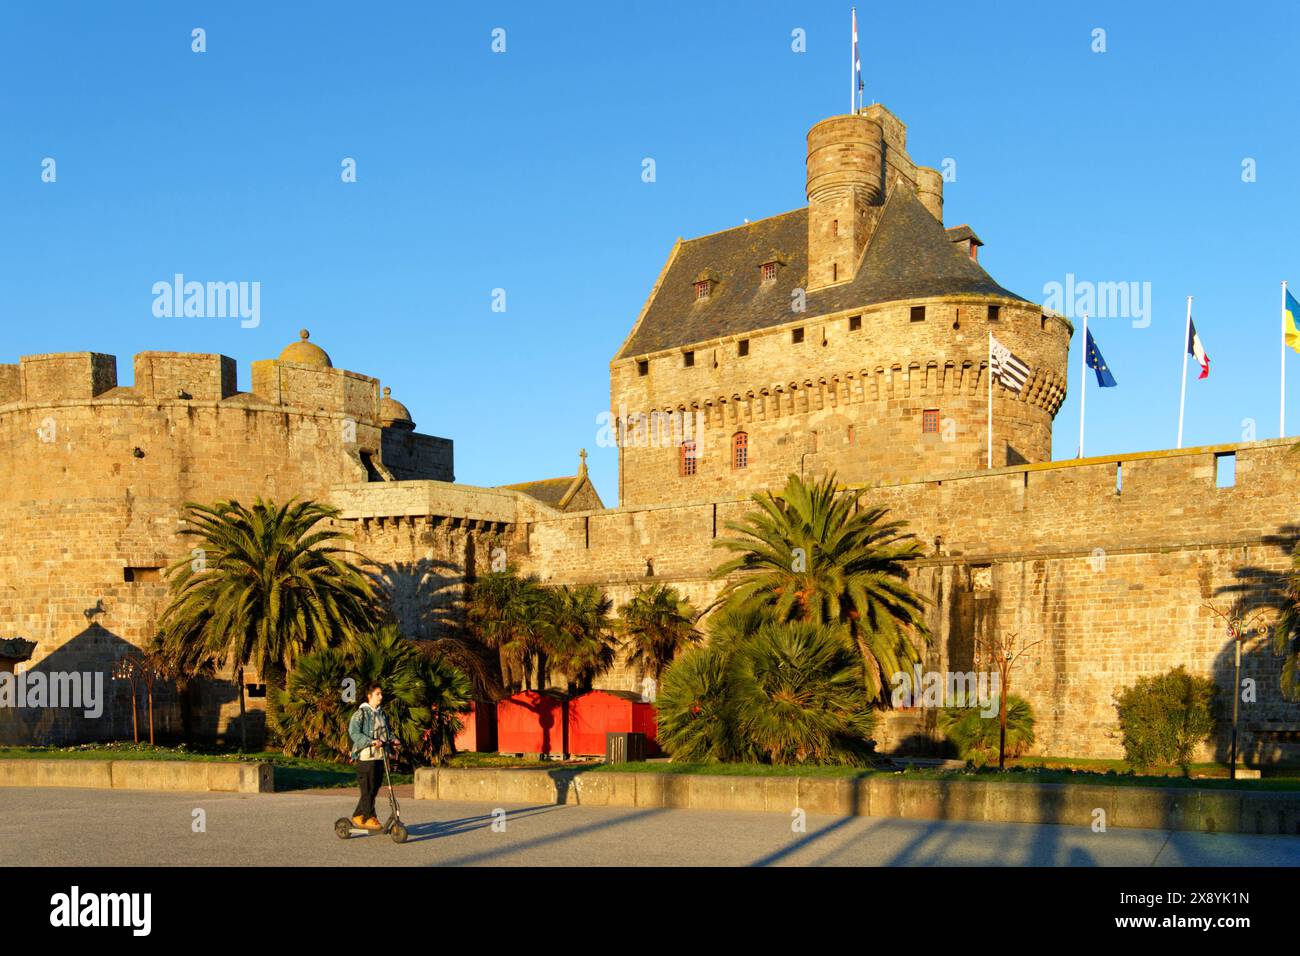 France, Ille et Vilaine, Cote d'Emeraude (Emerald Coast), Saint Malo, the ramparts of the walled city and the castle Stock Photo